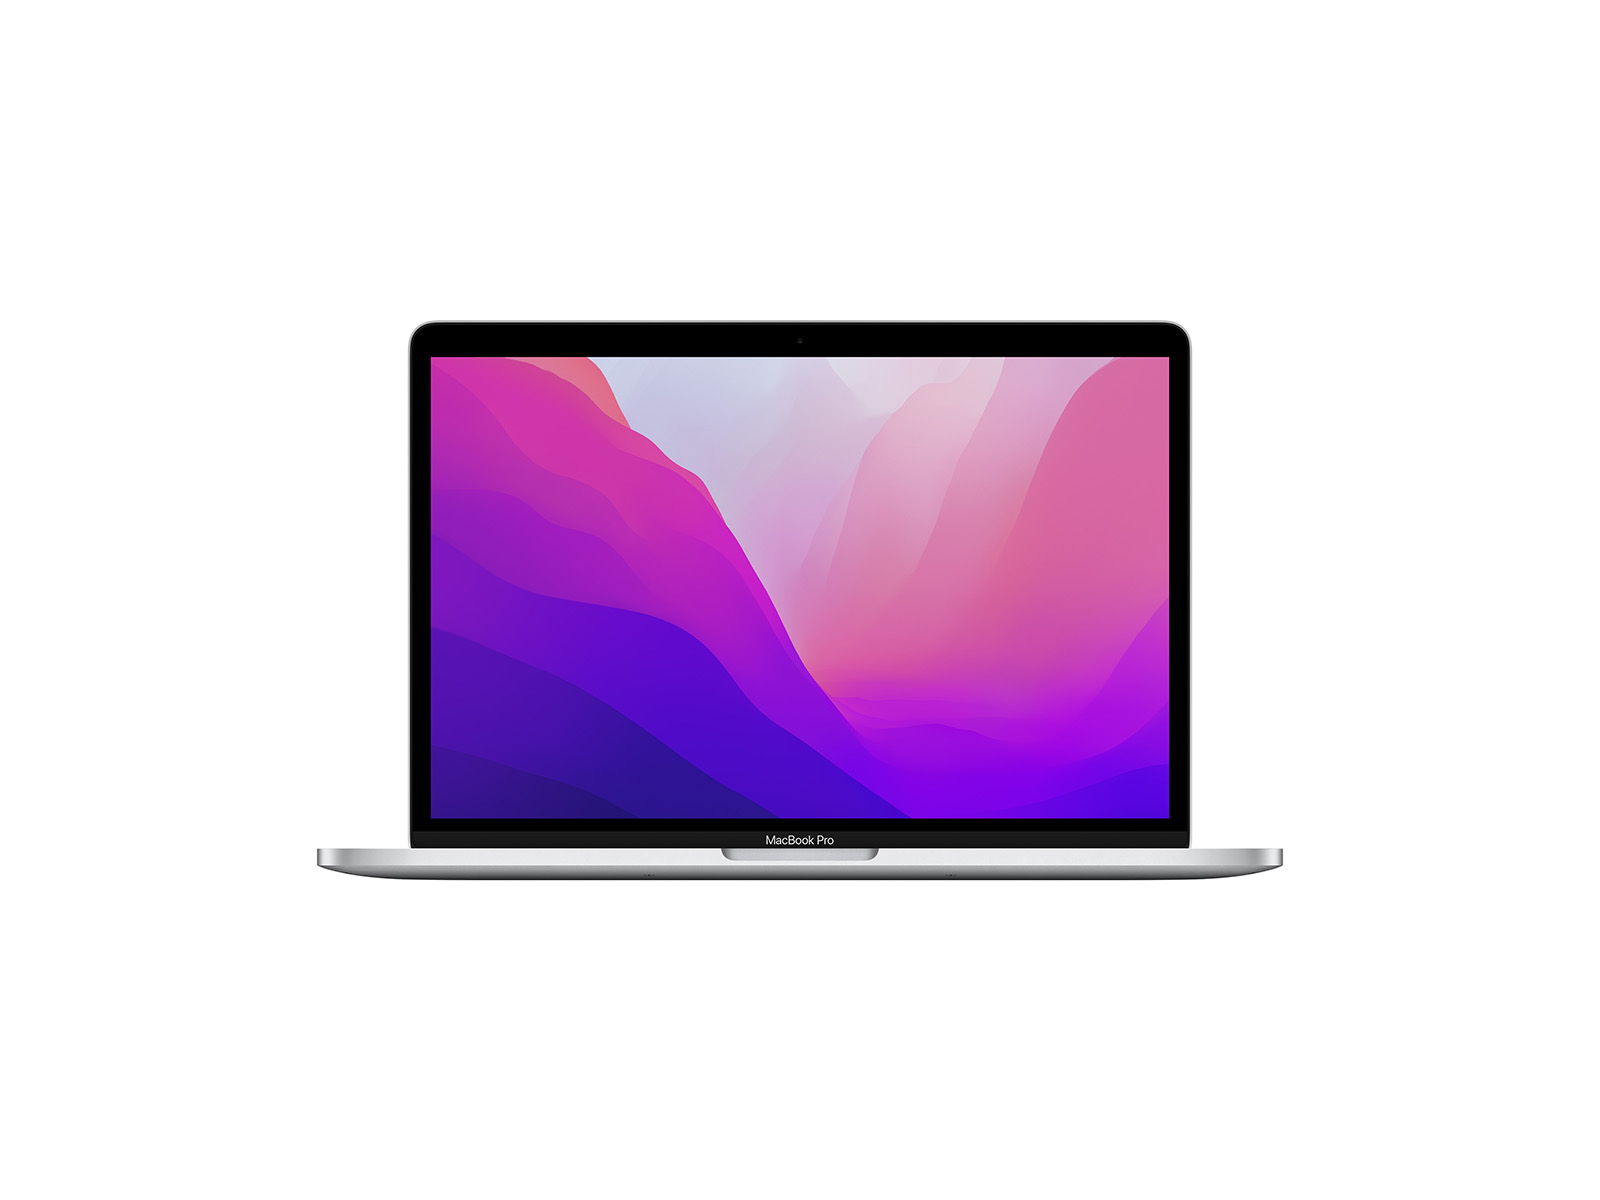 Get Your Hands On A Refurbished MacBook Pro For Under $440